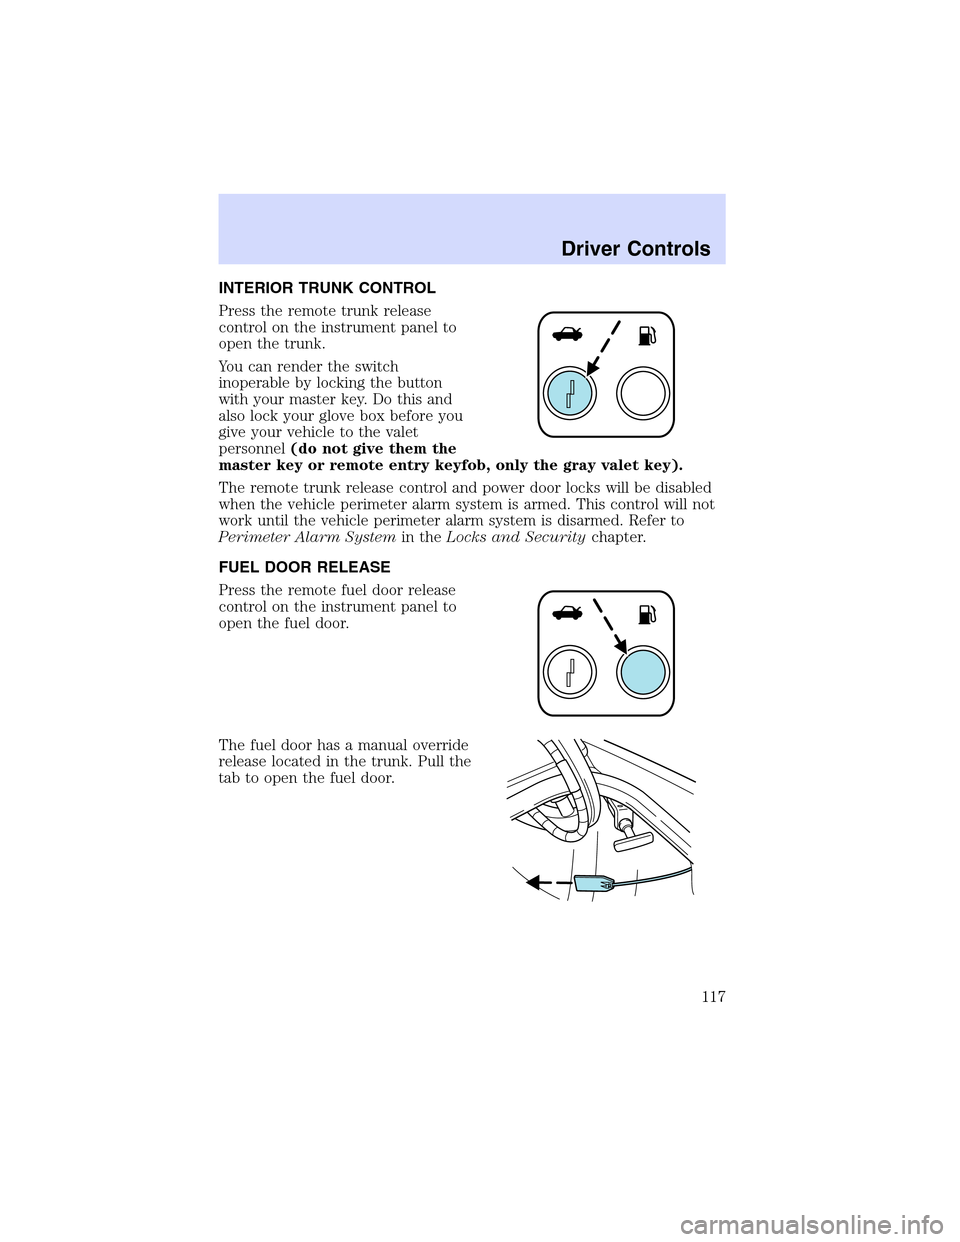 LINCOLN LS 2003  Owners Manual INTERIORTRUNKCONTROL
Press the remote trunk release
control on the instrument panel to
open the trunk.
You can render the switch
inoperable by locking the button
with your master key. Do this and
also